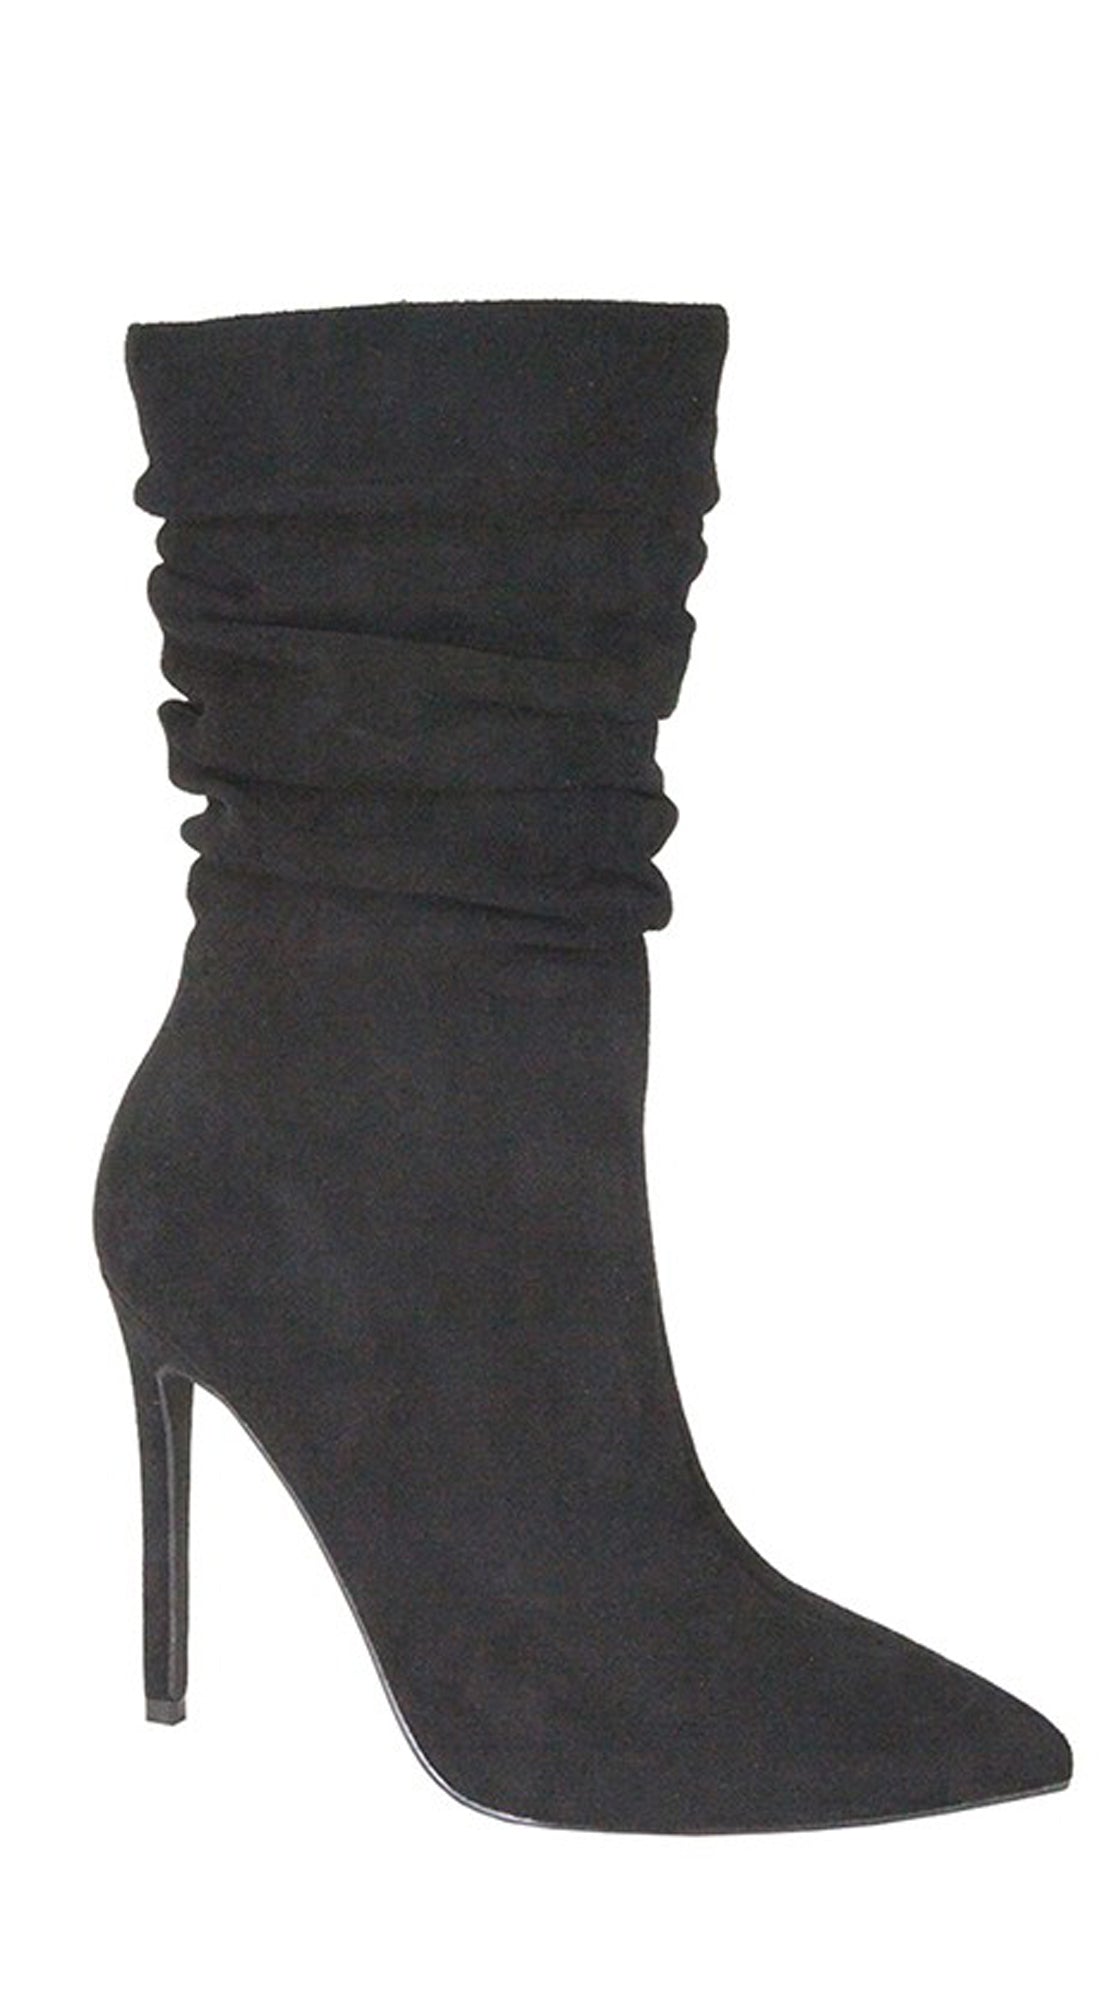 Ludovica Black Side Zipper Suede Pointy Toe High Heel Booties